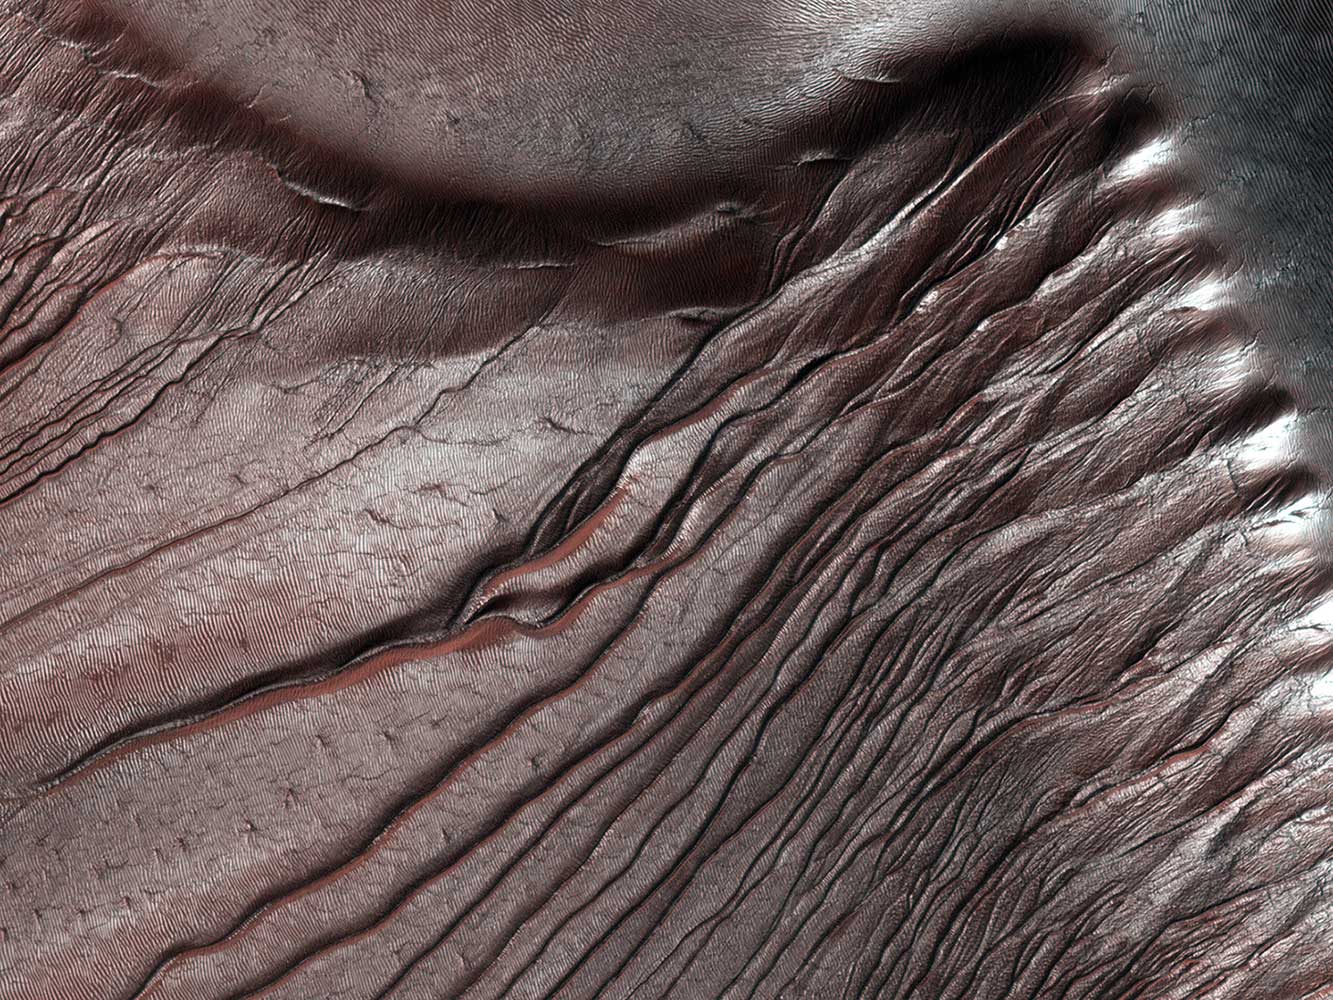 The Russell Crater dunes seen on Mars in this photo released on Feb. 5, 2014.